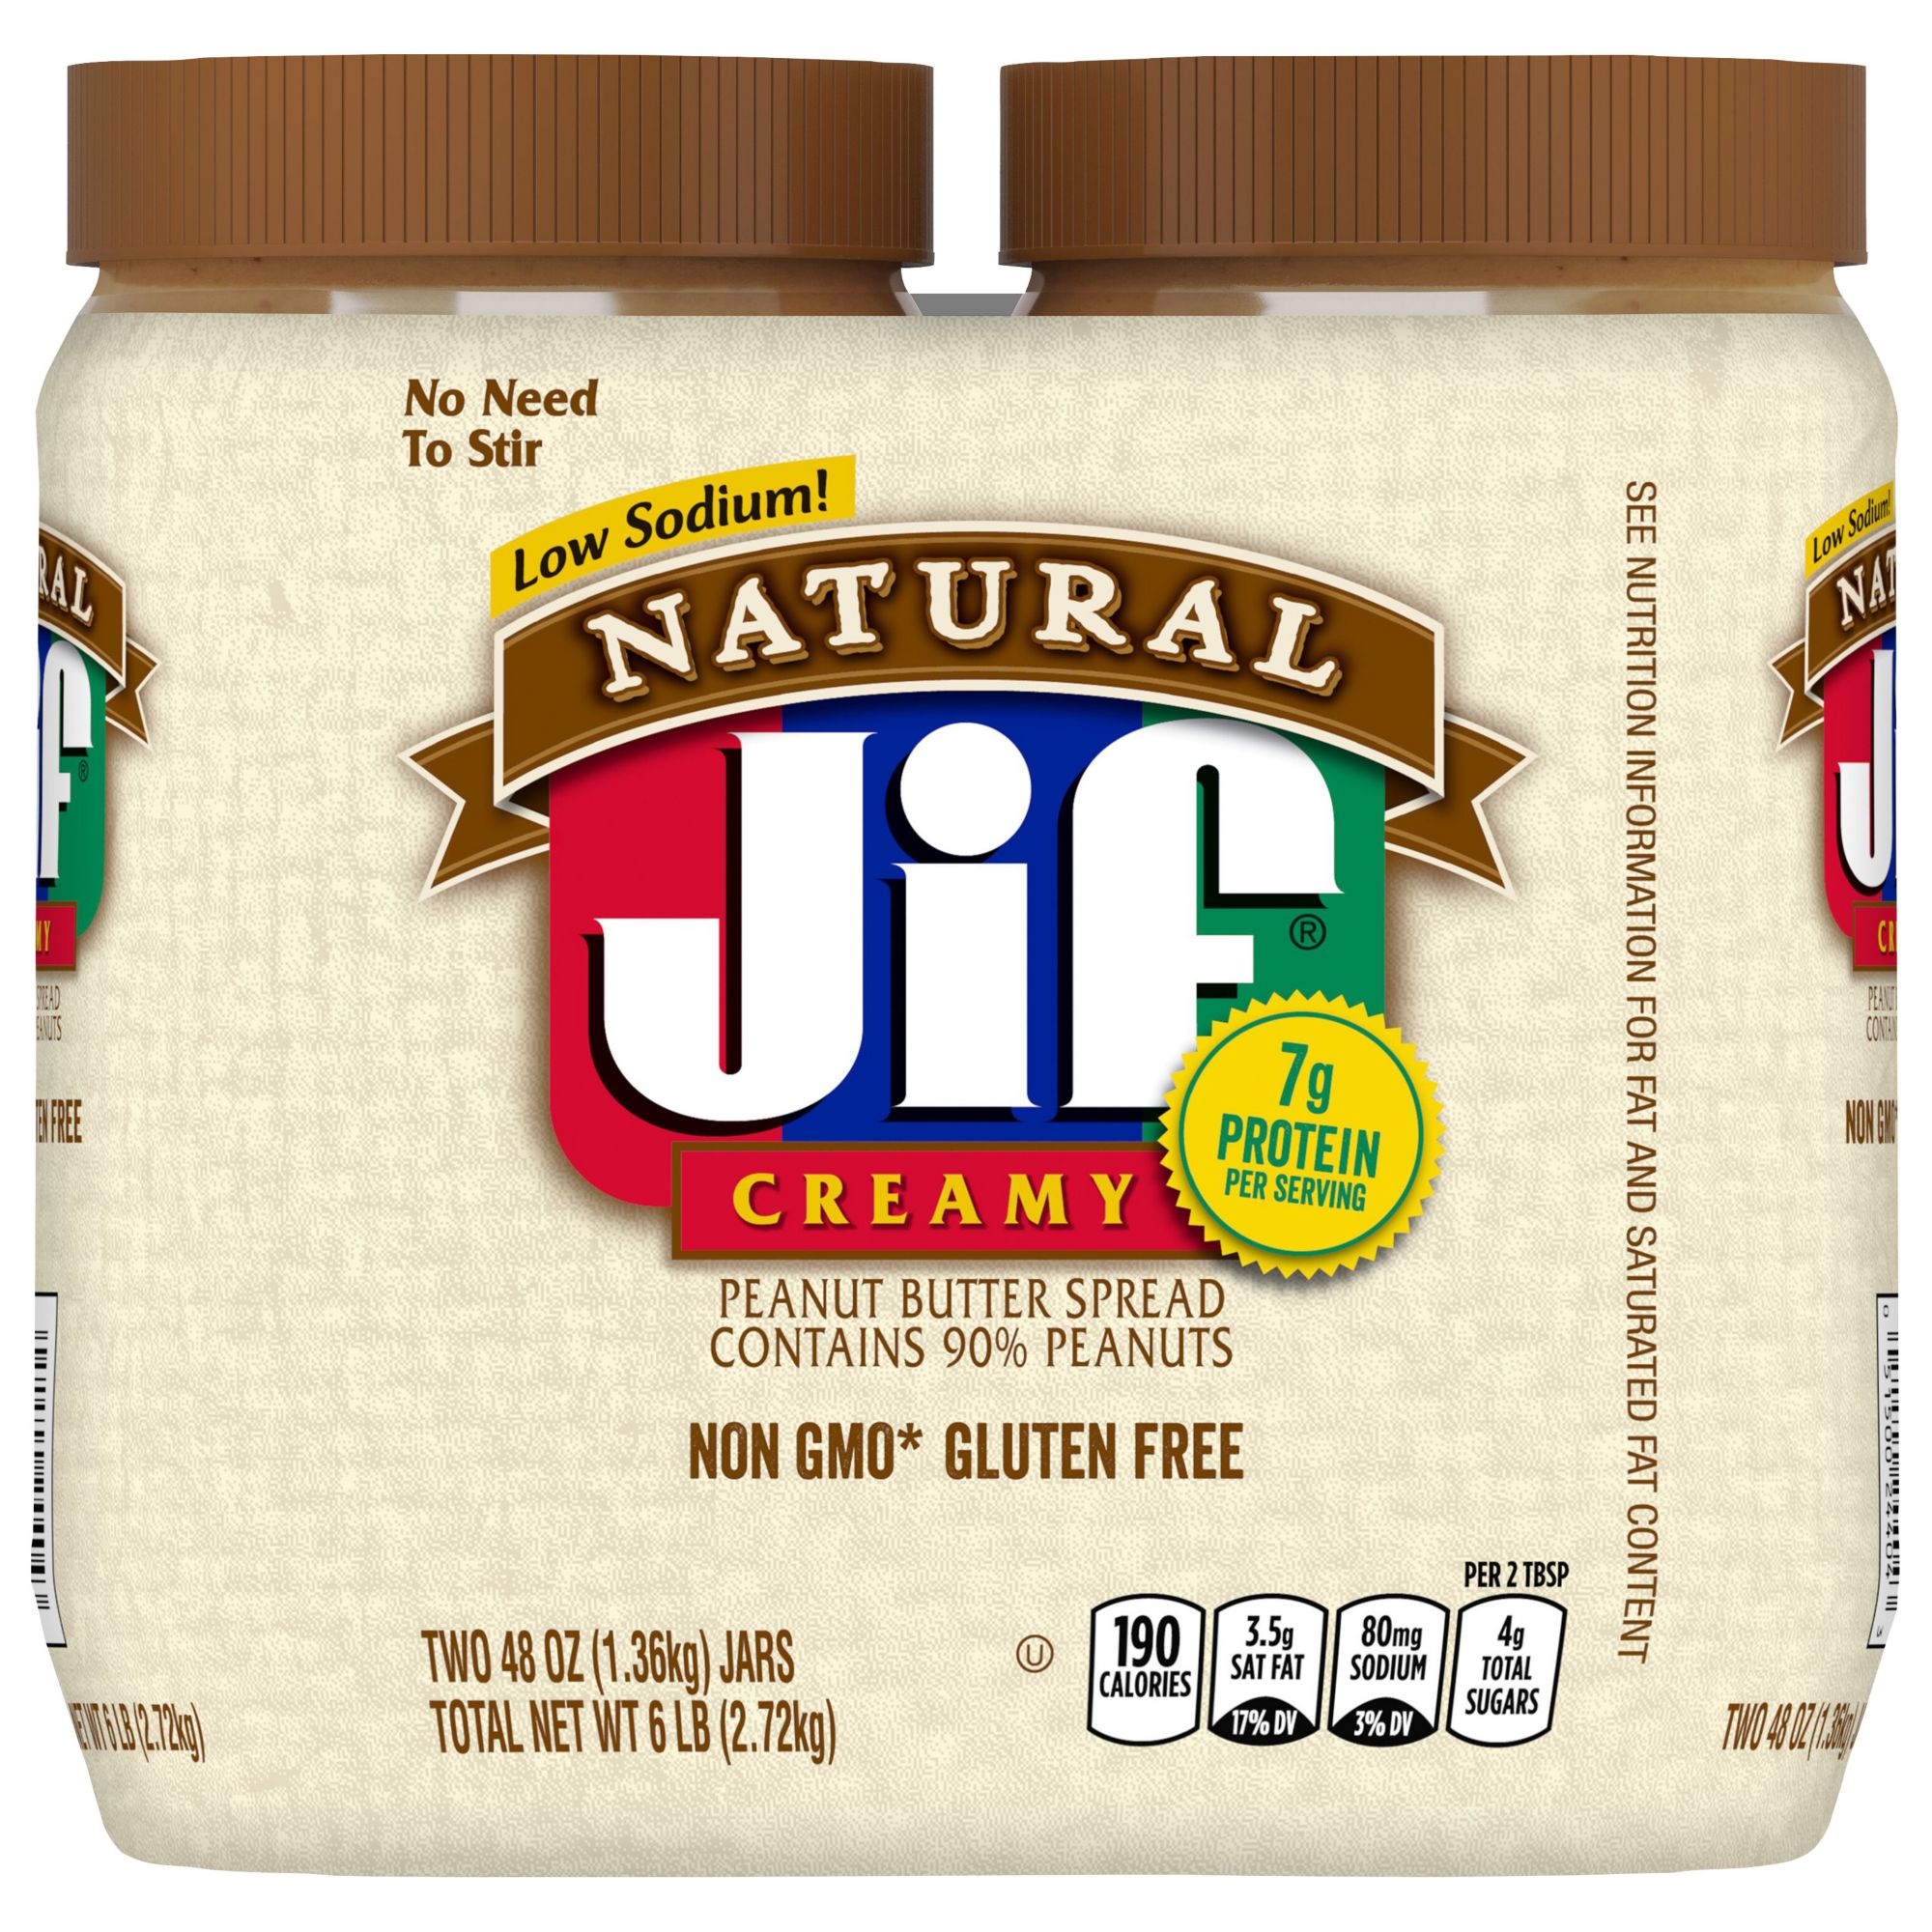 Buy Creamy Peanut Butter With Free Lick Mat